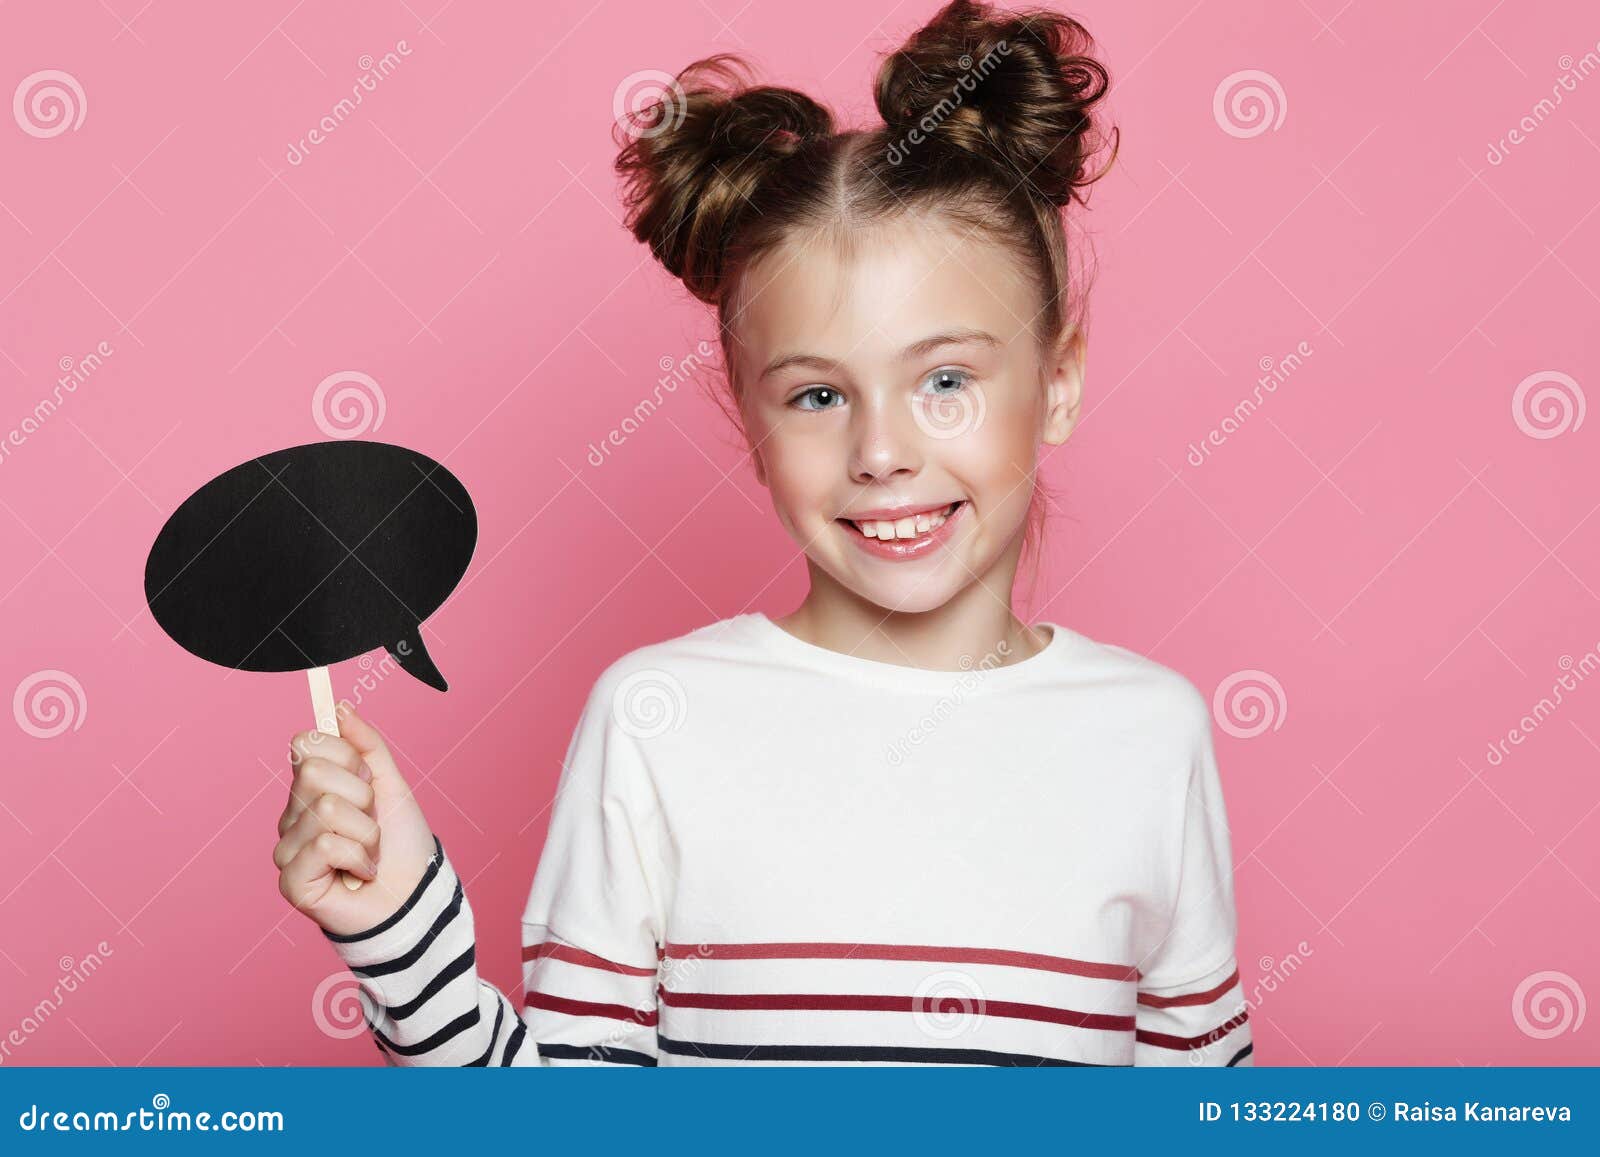 Cute Girl 7-8 Year Old Posing In Studio Over Pink Background Stock